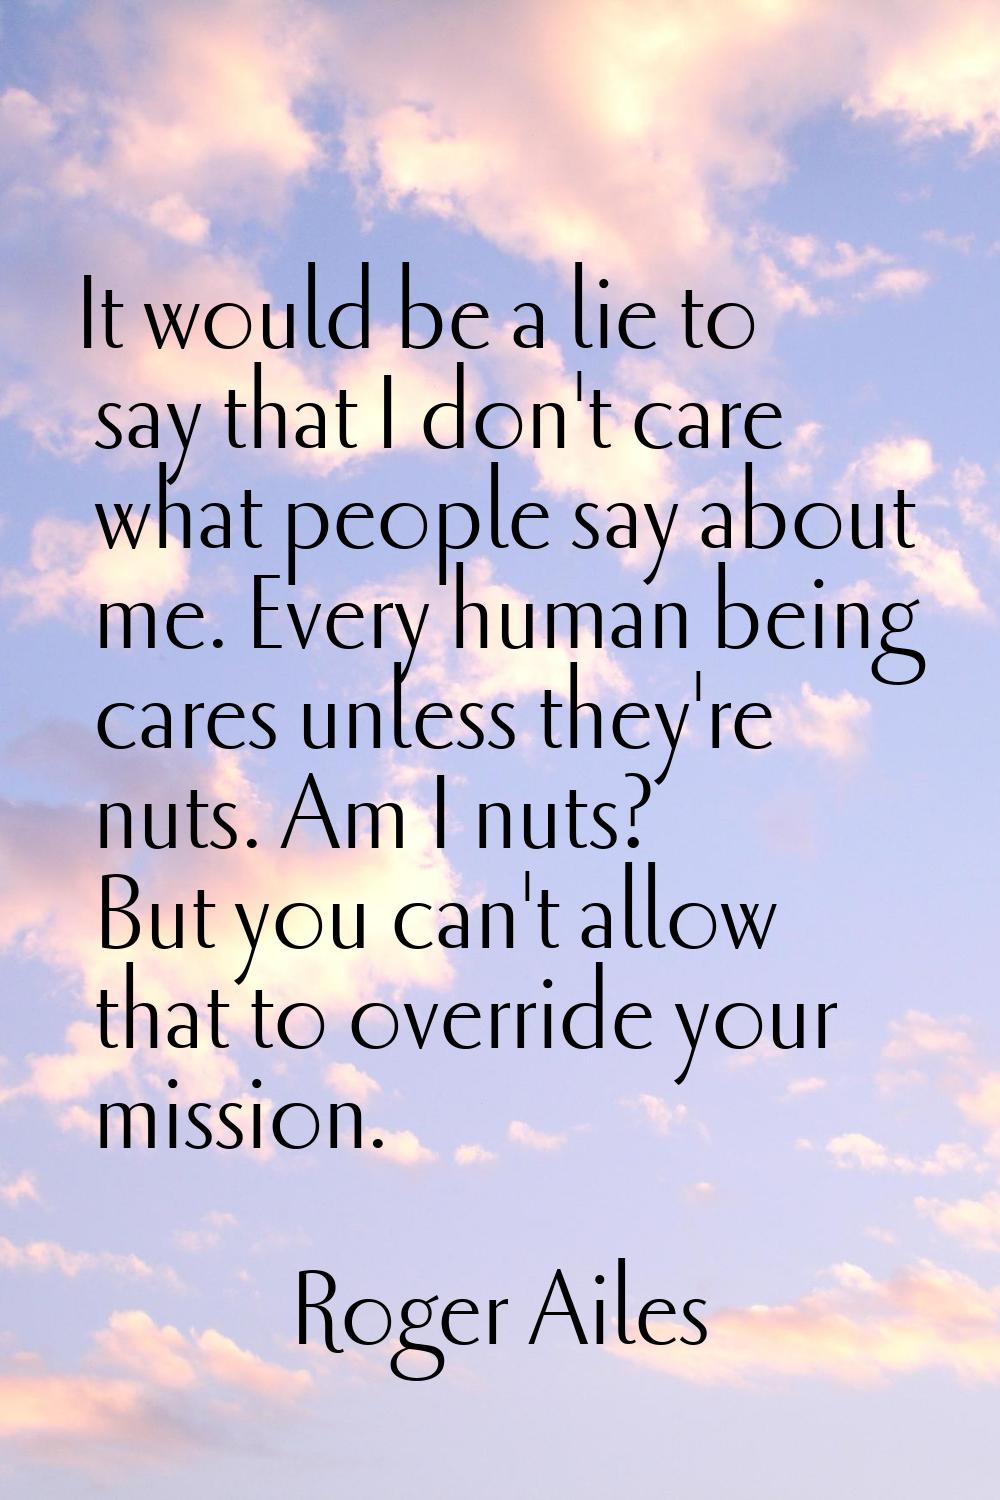 It would be a lie to say that I don't care what people say about me. Every human being cares unless